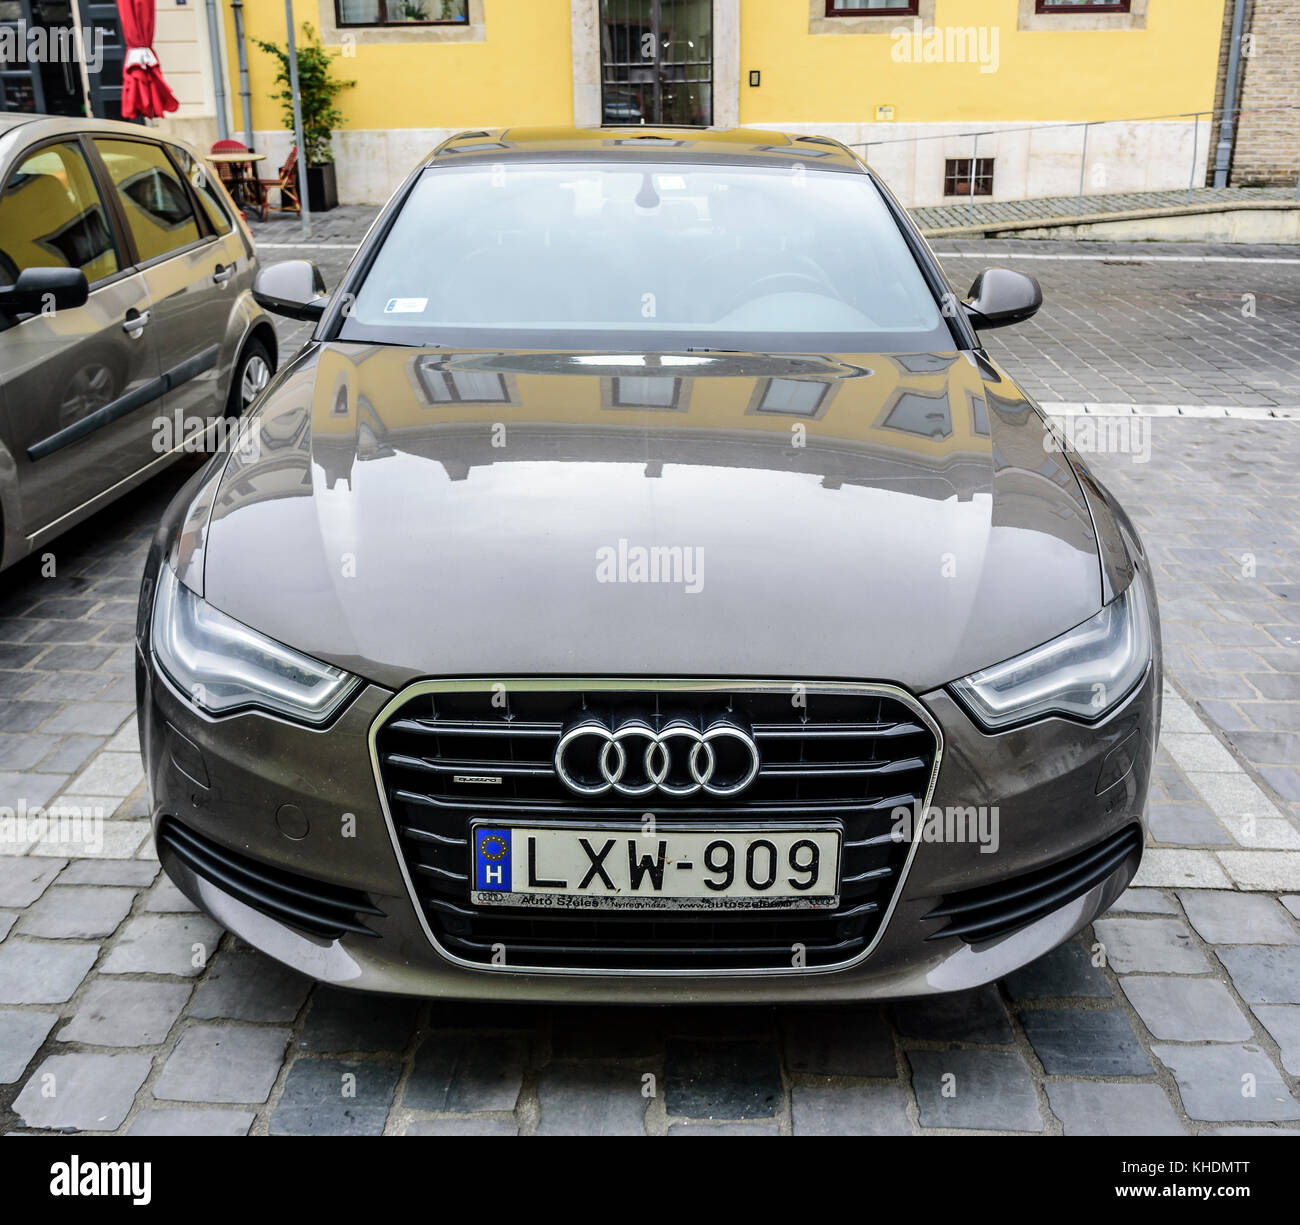 audi a6 sedan german car in an empty parking lot photo session inside car detailed photos with dashboard seats navigation display automatic gear stock photo alamy